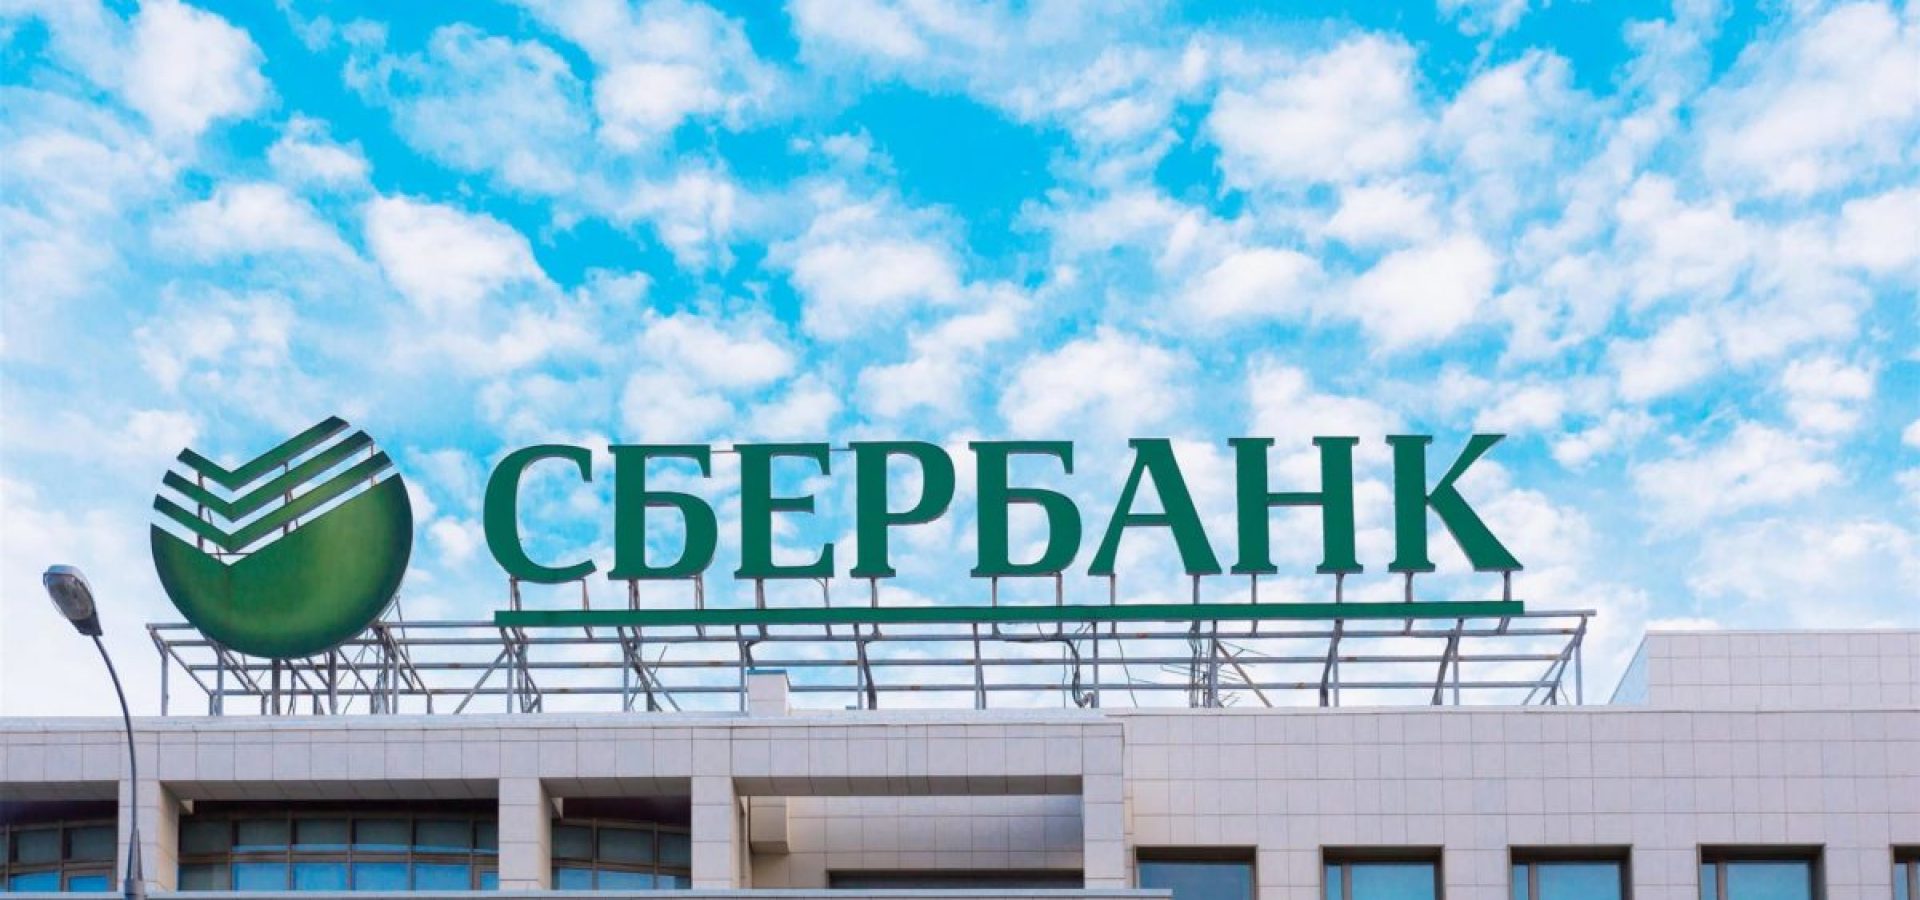 Crypto industry and Sberbank